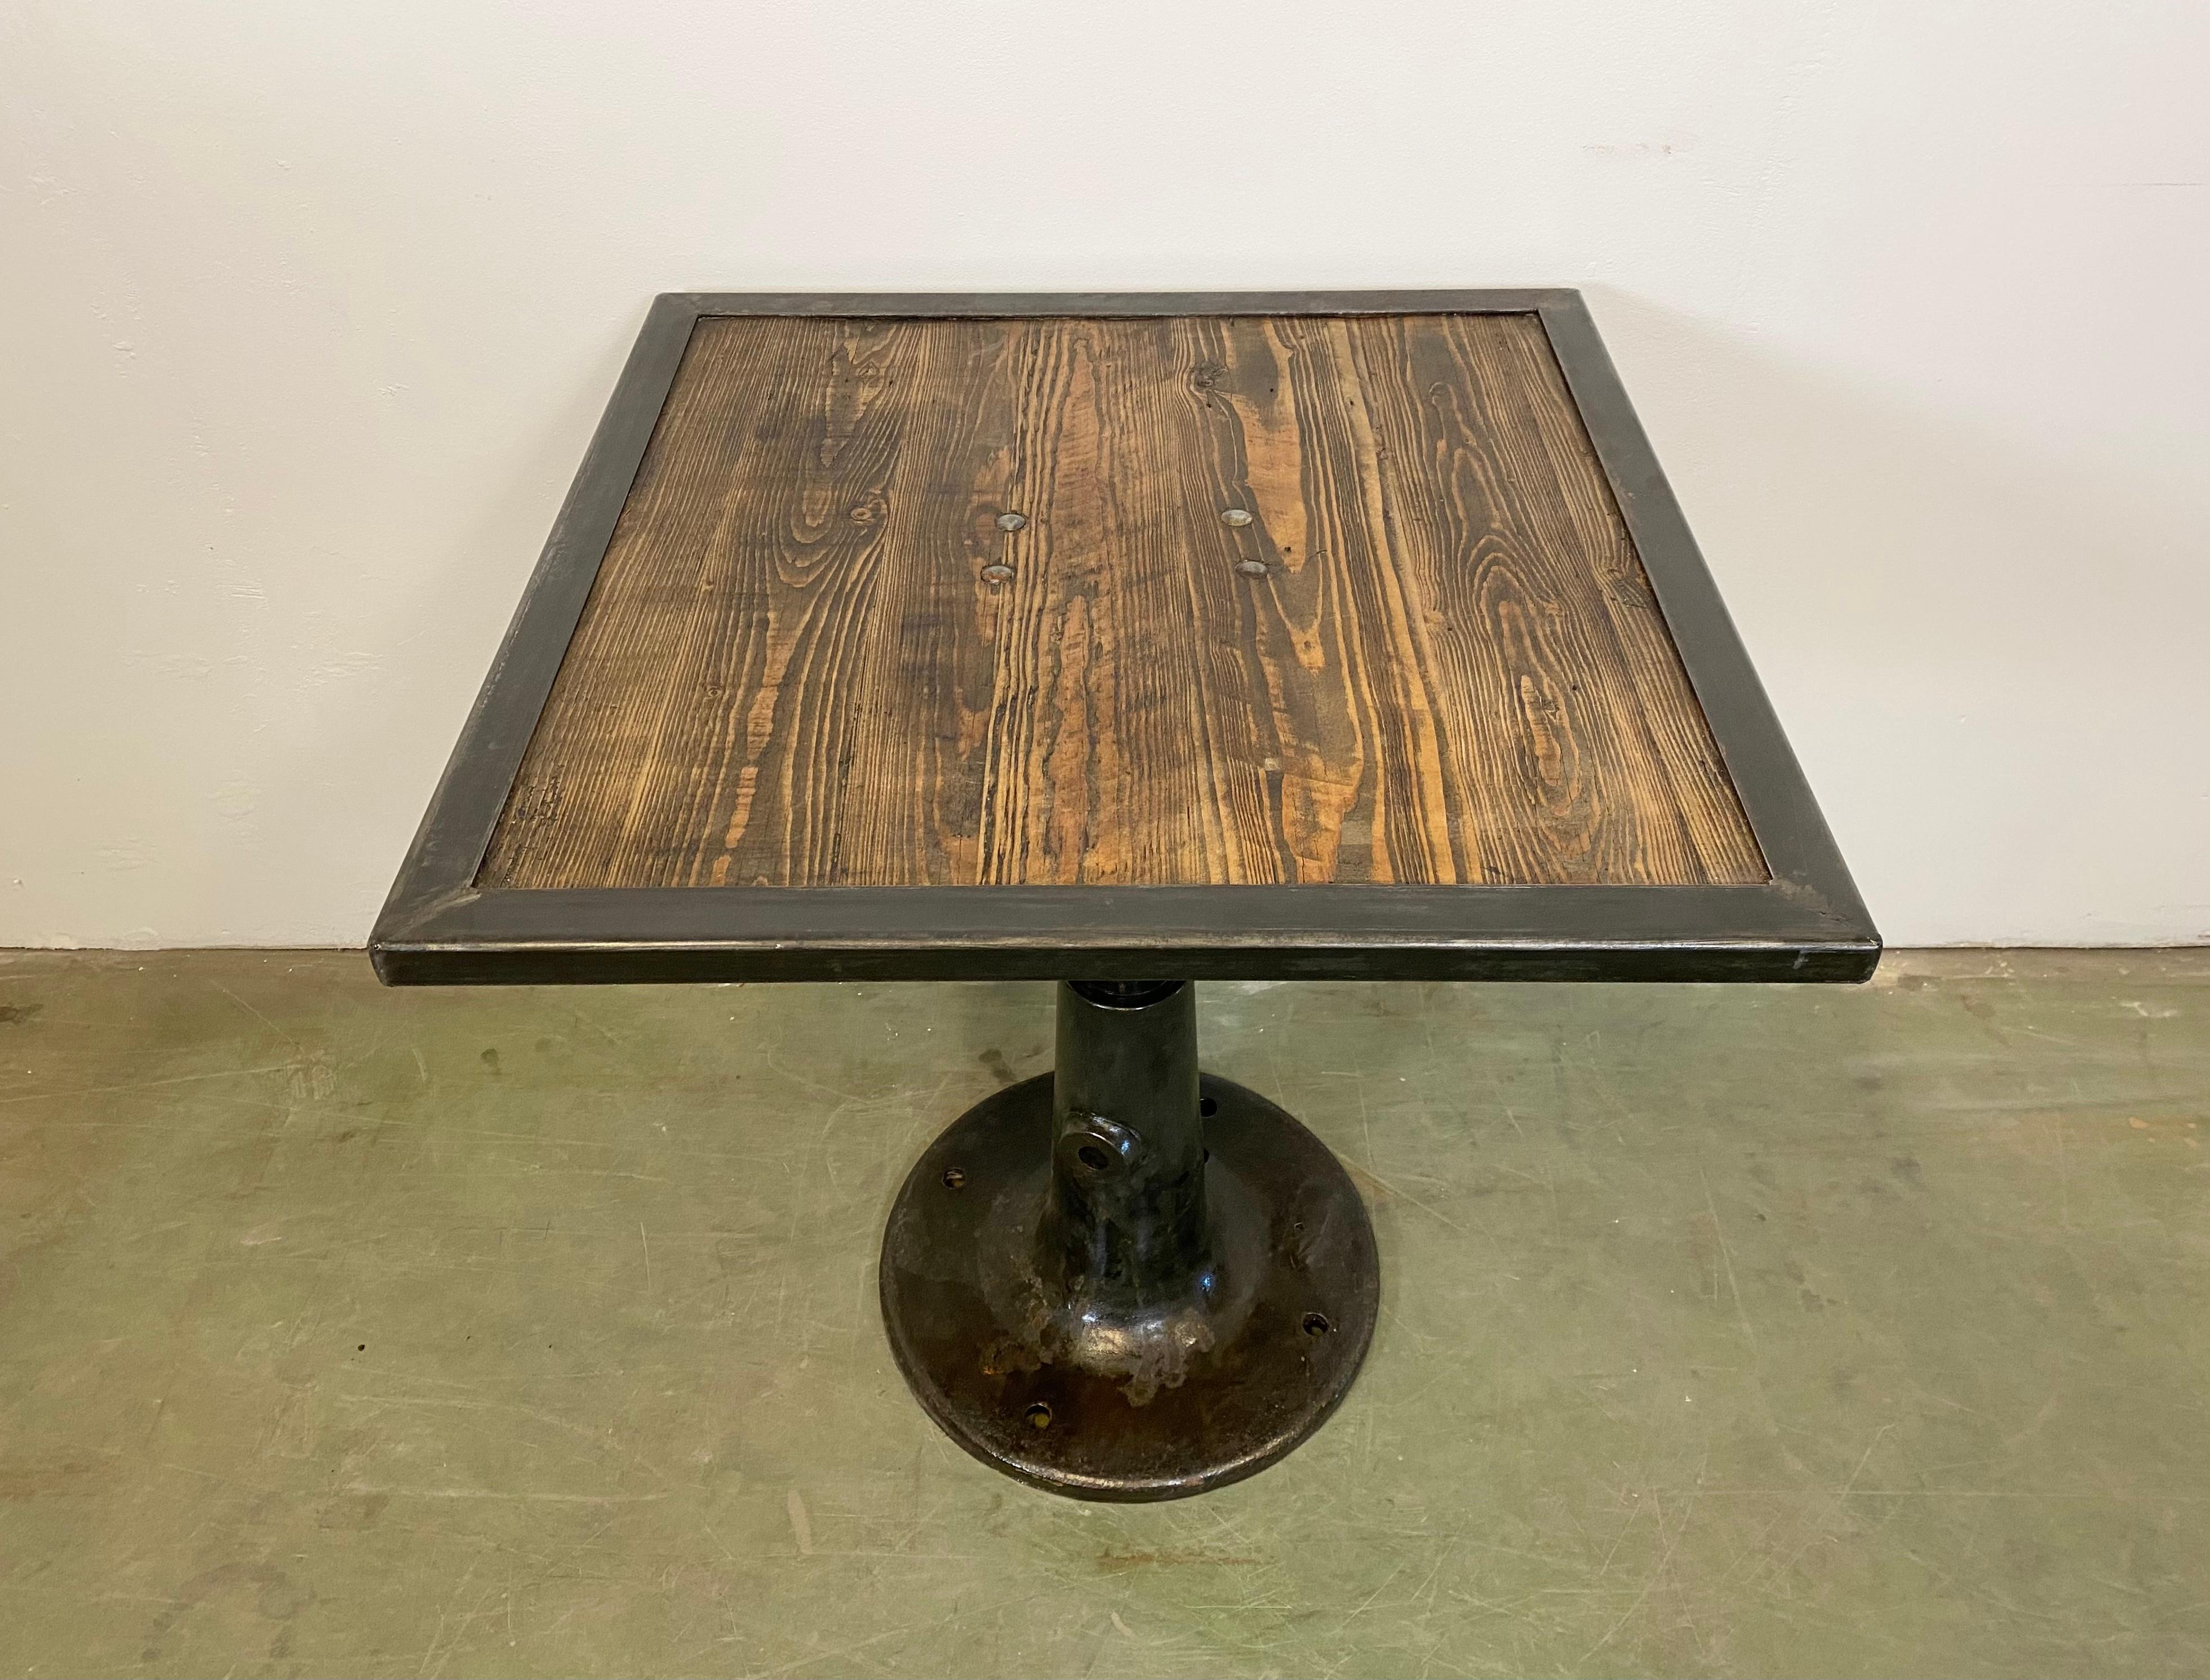 Vintage Industrial square coffee table from the 1960s. It features a black cast iron leg and a solid wooden plate with a black iron frame. The weight of the table is 50 kg.